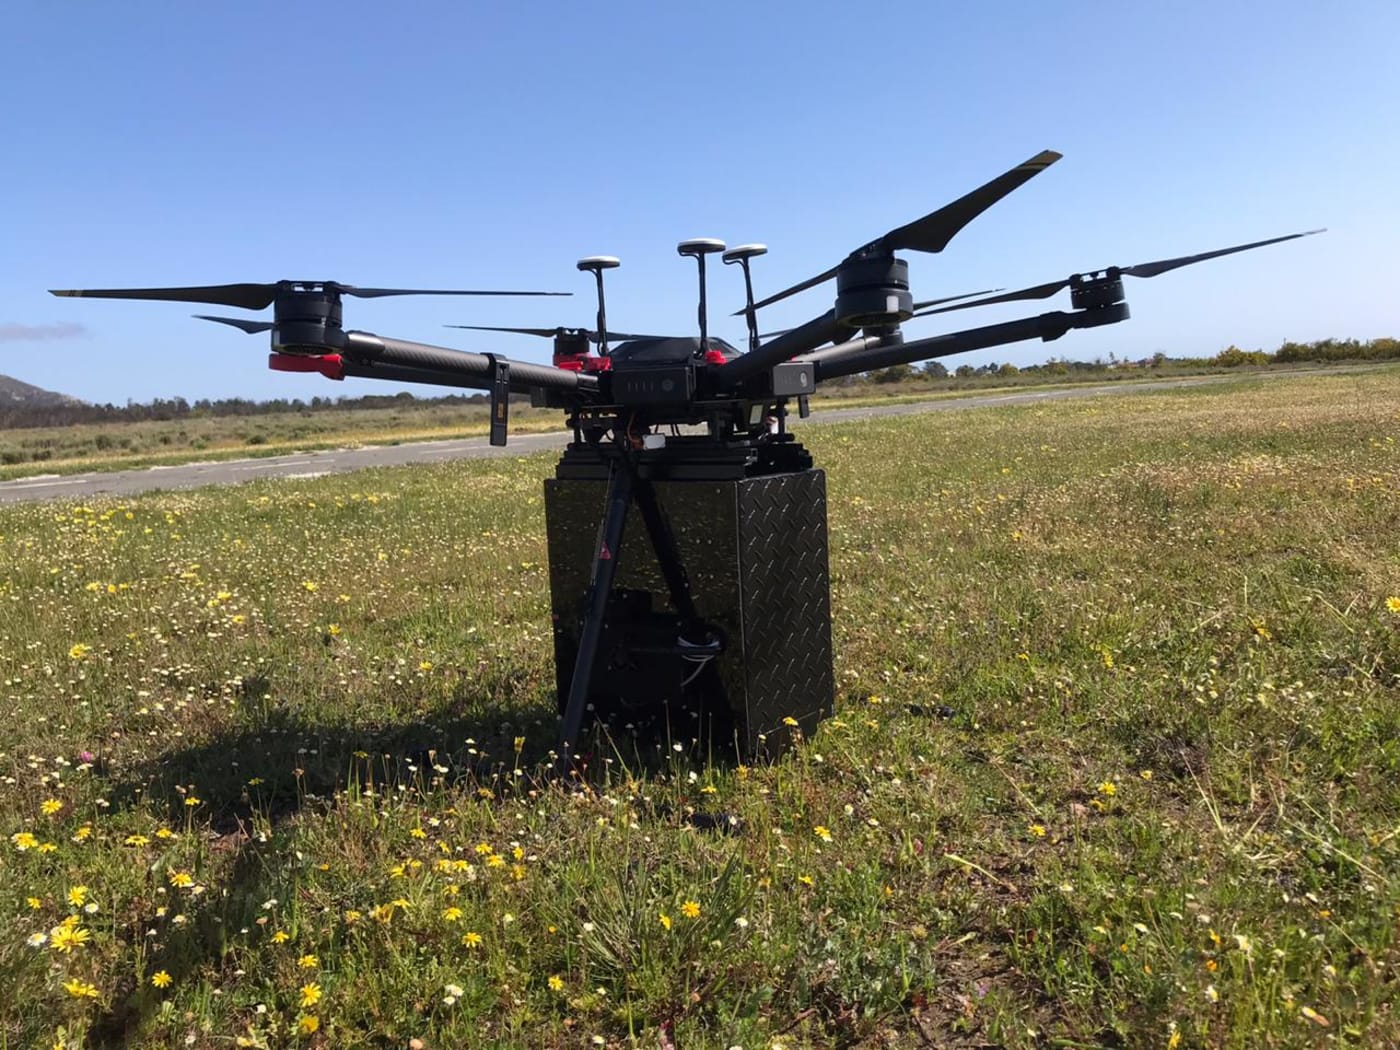 WWF-Australia is exploring deploying innovative techniques such as seed planting drones to help regenerate Australia after the bushfires.